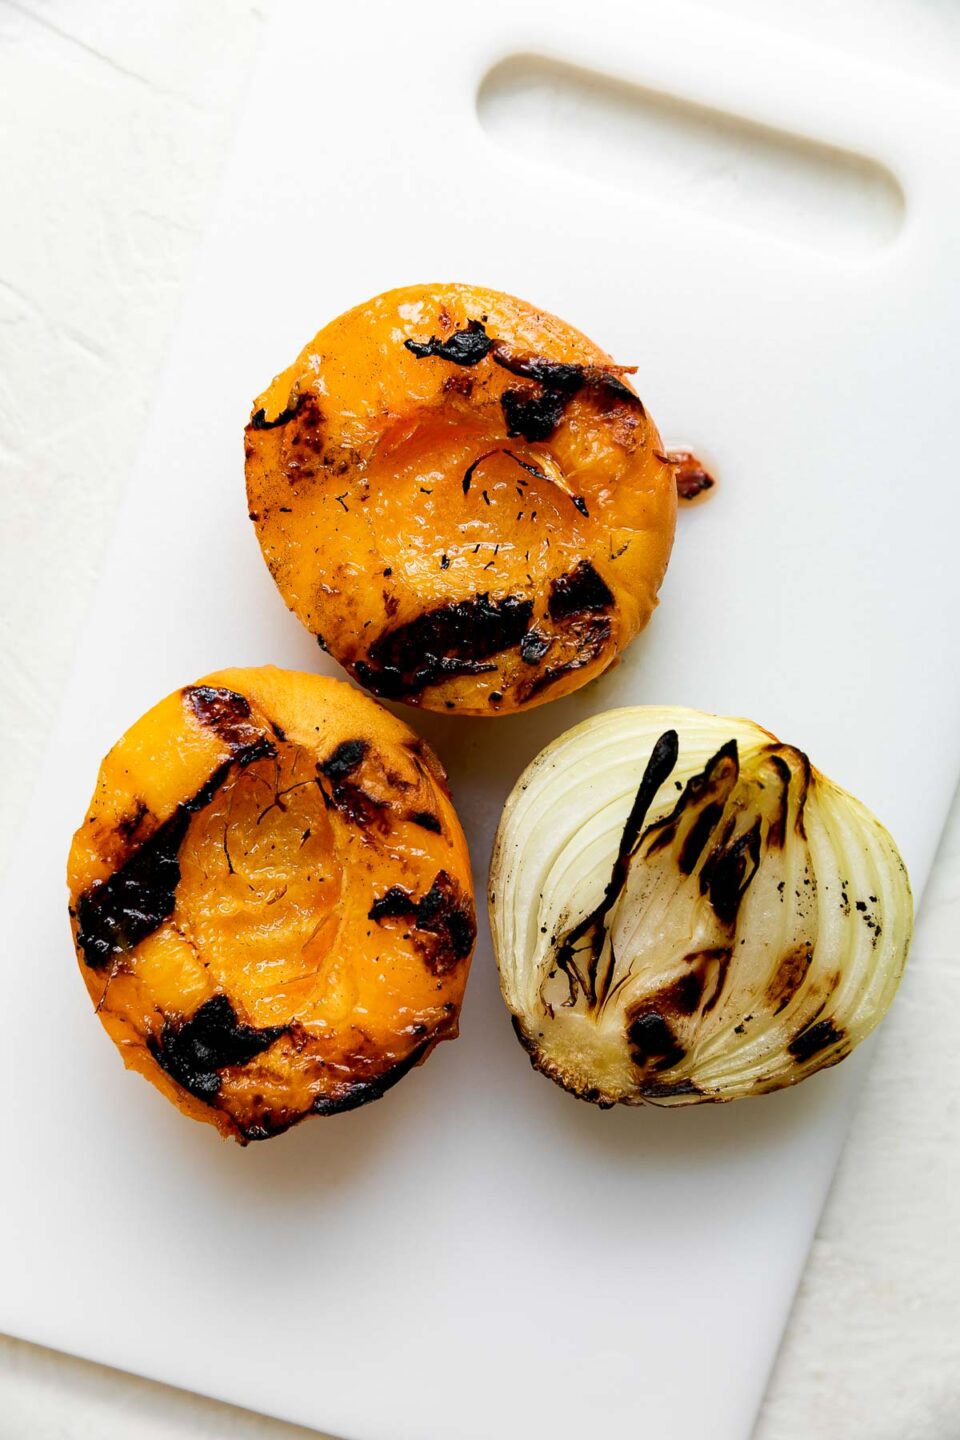 Two grilled peach halves and one half of a grilled onion sit atop a white plastic cutting board that sits atop a creamy white textured surface.